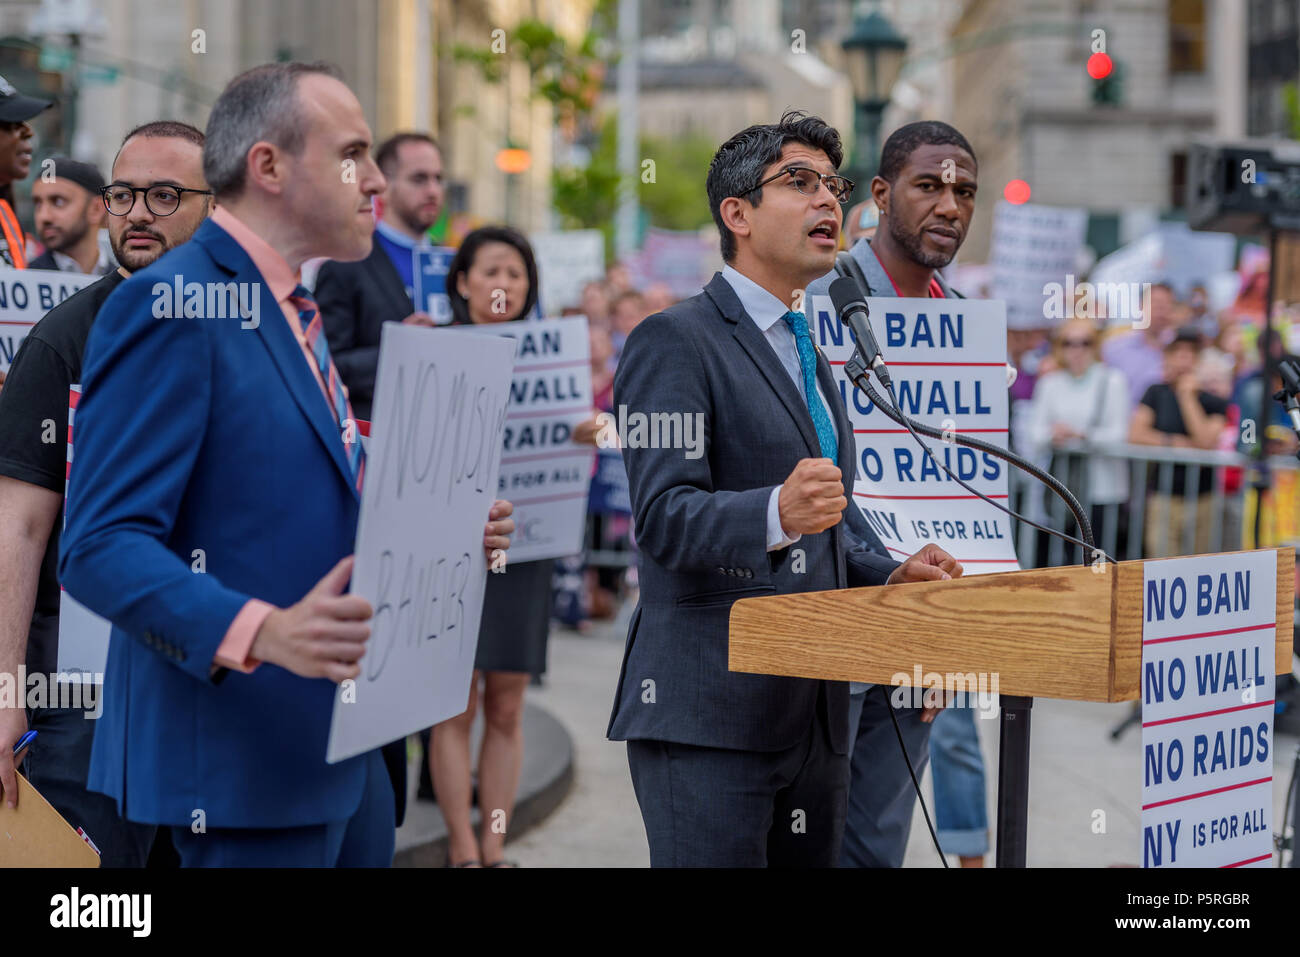 New York, United States. 26th June, 2018. NYC Councilmembers Treyger, Menchaca and Williams - Over a thousand New Yorkers and immigration rights community organizations gathered at Foley Square in lower Manhattan on June 26, 2018, to rally against the Supreme Court decision announced this morning to uphold the Muslim Ban. The Asian American Federation is calling on its member agencies, advocates and community leaders, allies, and elected officials to stand together in solidarity. Credit: Erik McGregor/Pacific Press/Alamy Live News Stock Photo